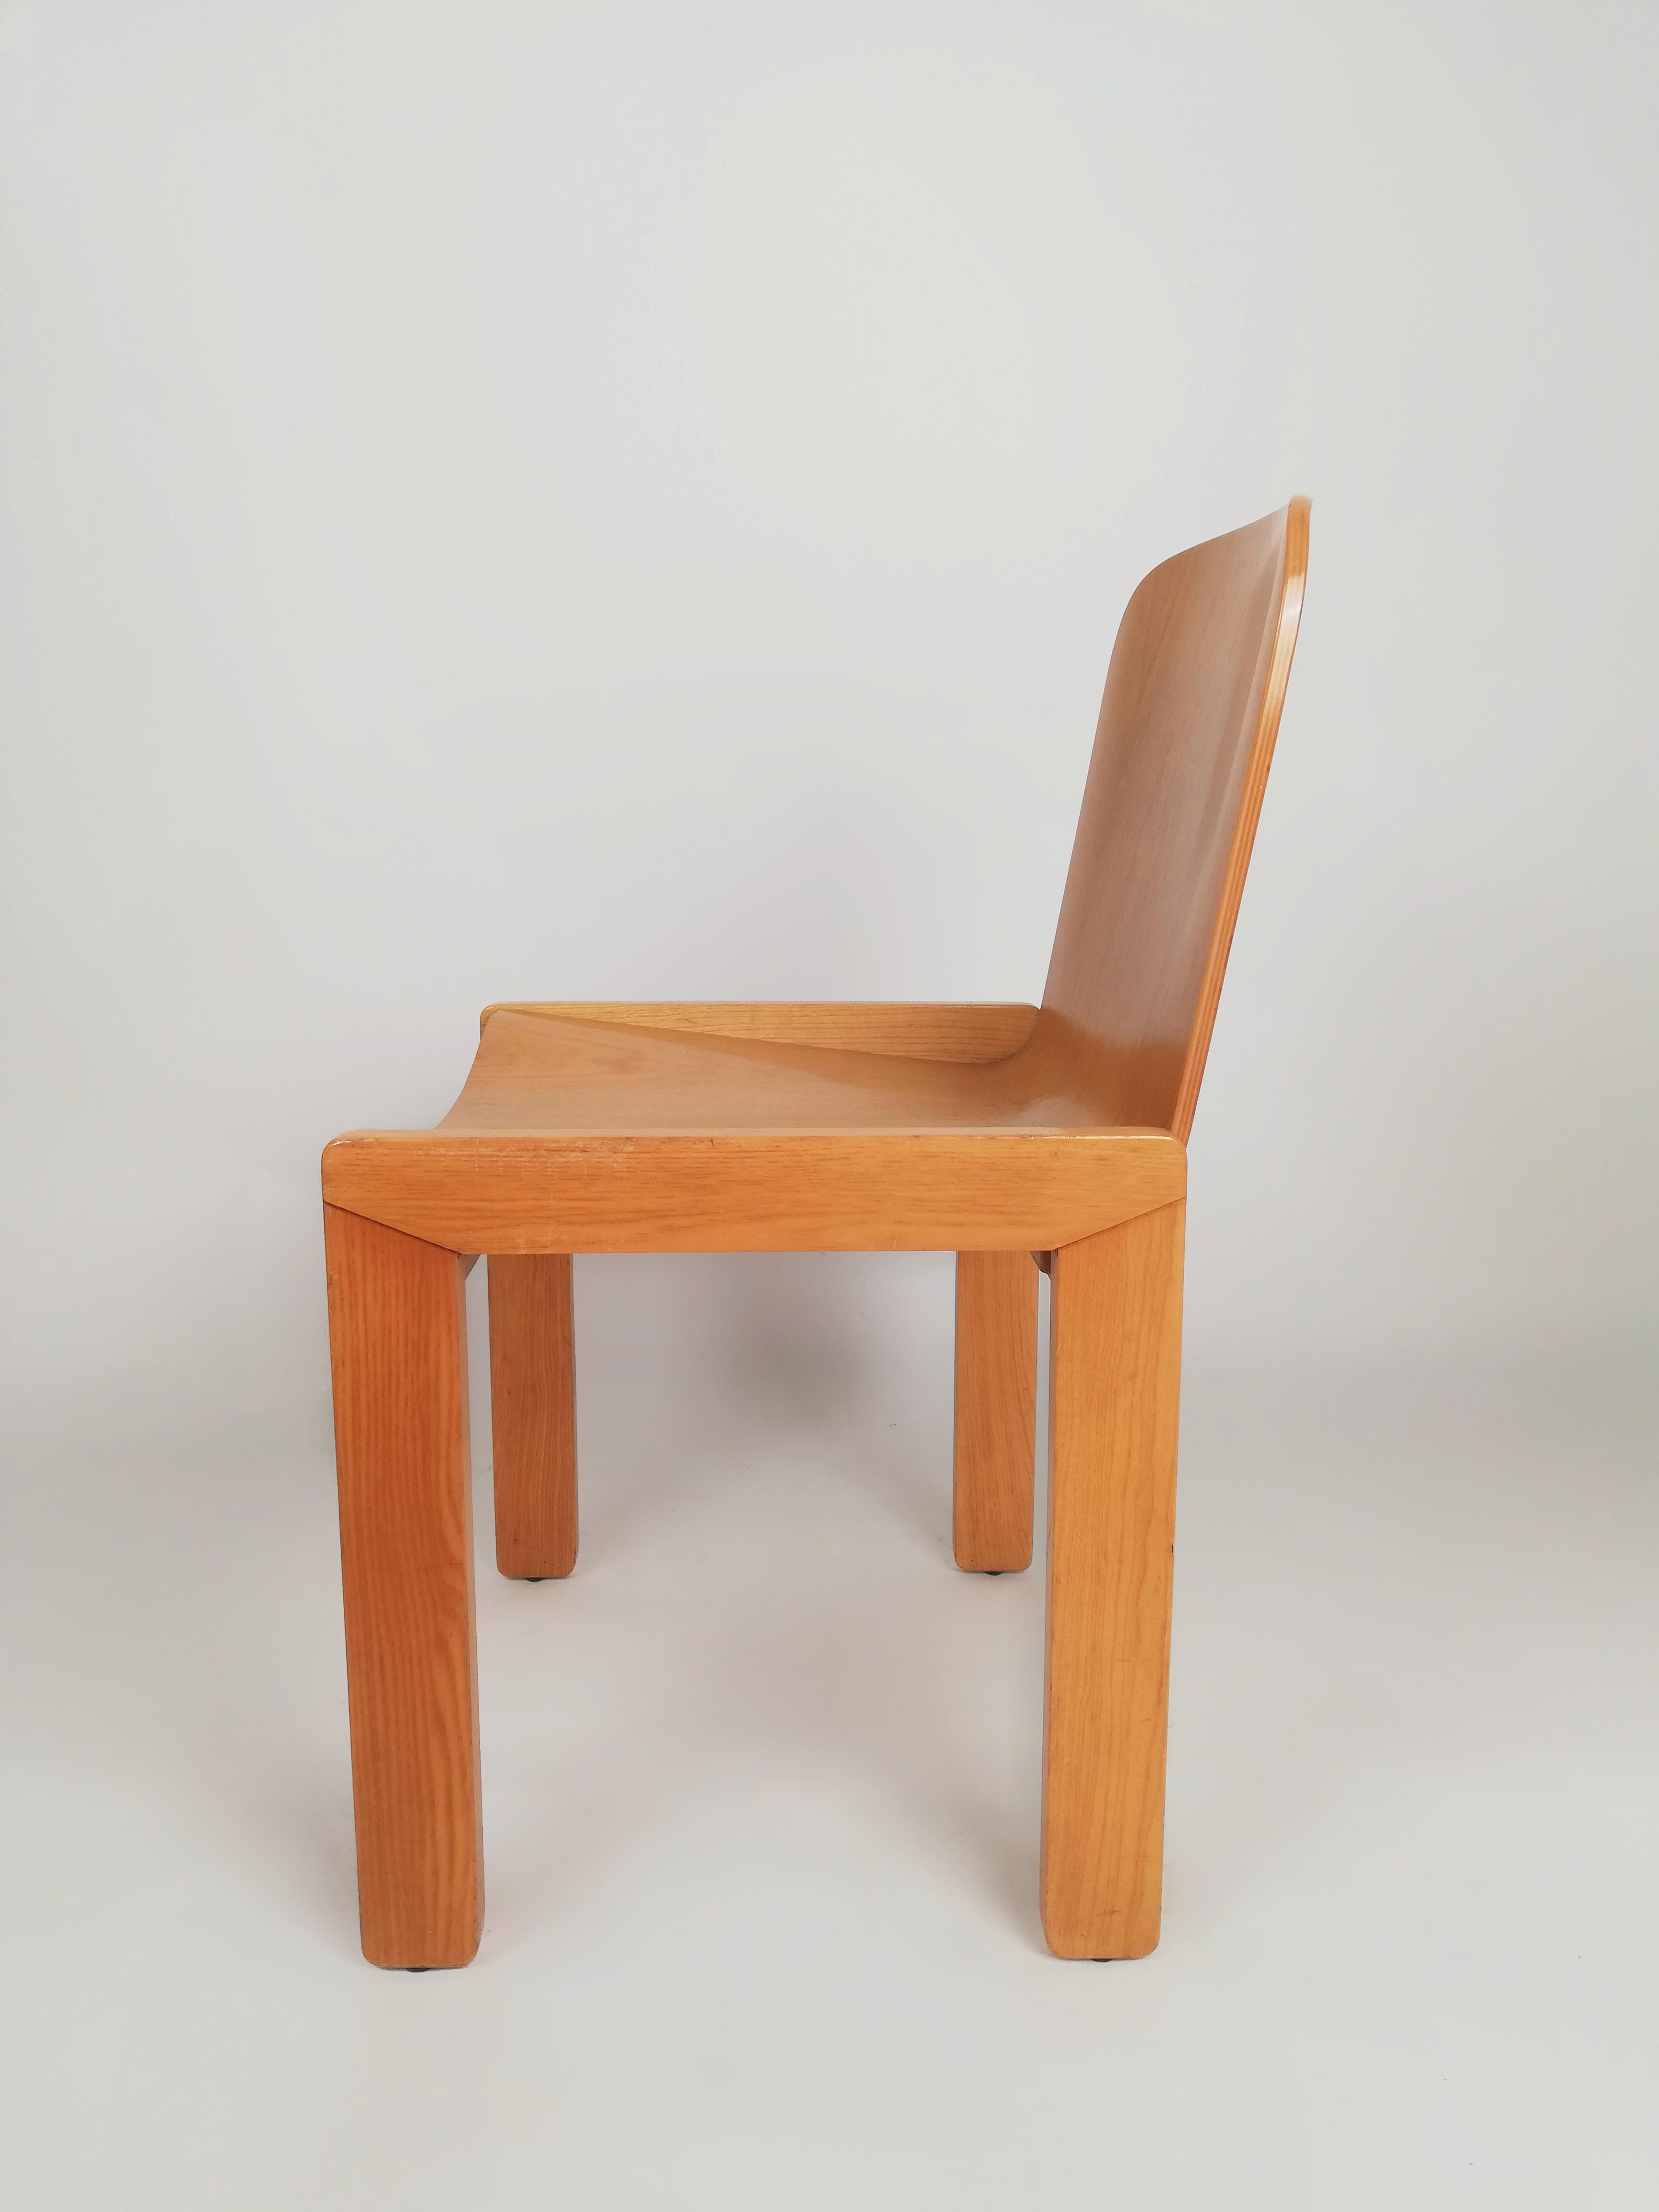 Italian 6 Curved Plywood Dining Chairs by Molteni in the style of Scarpa, Italy, 1970s For Sale